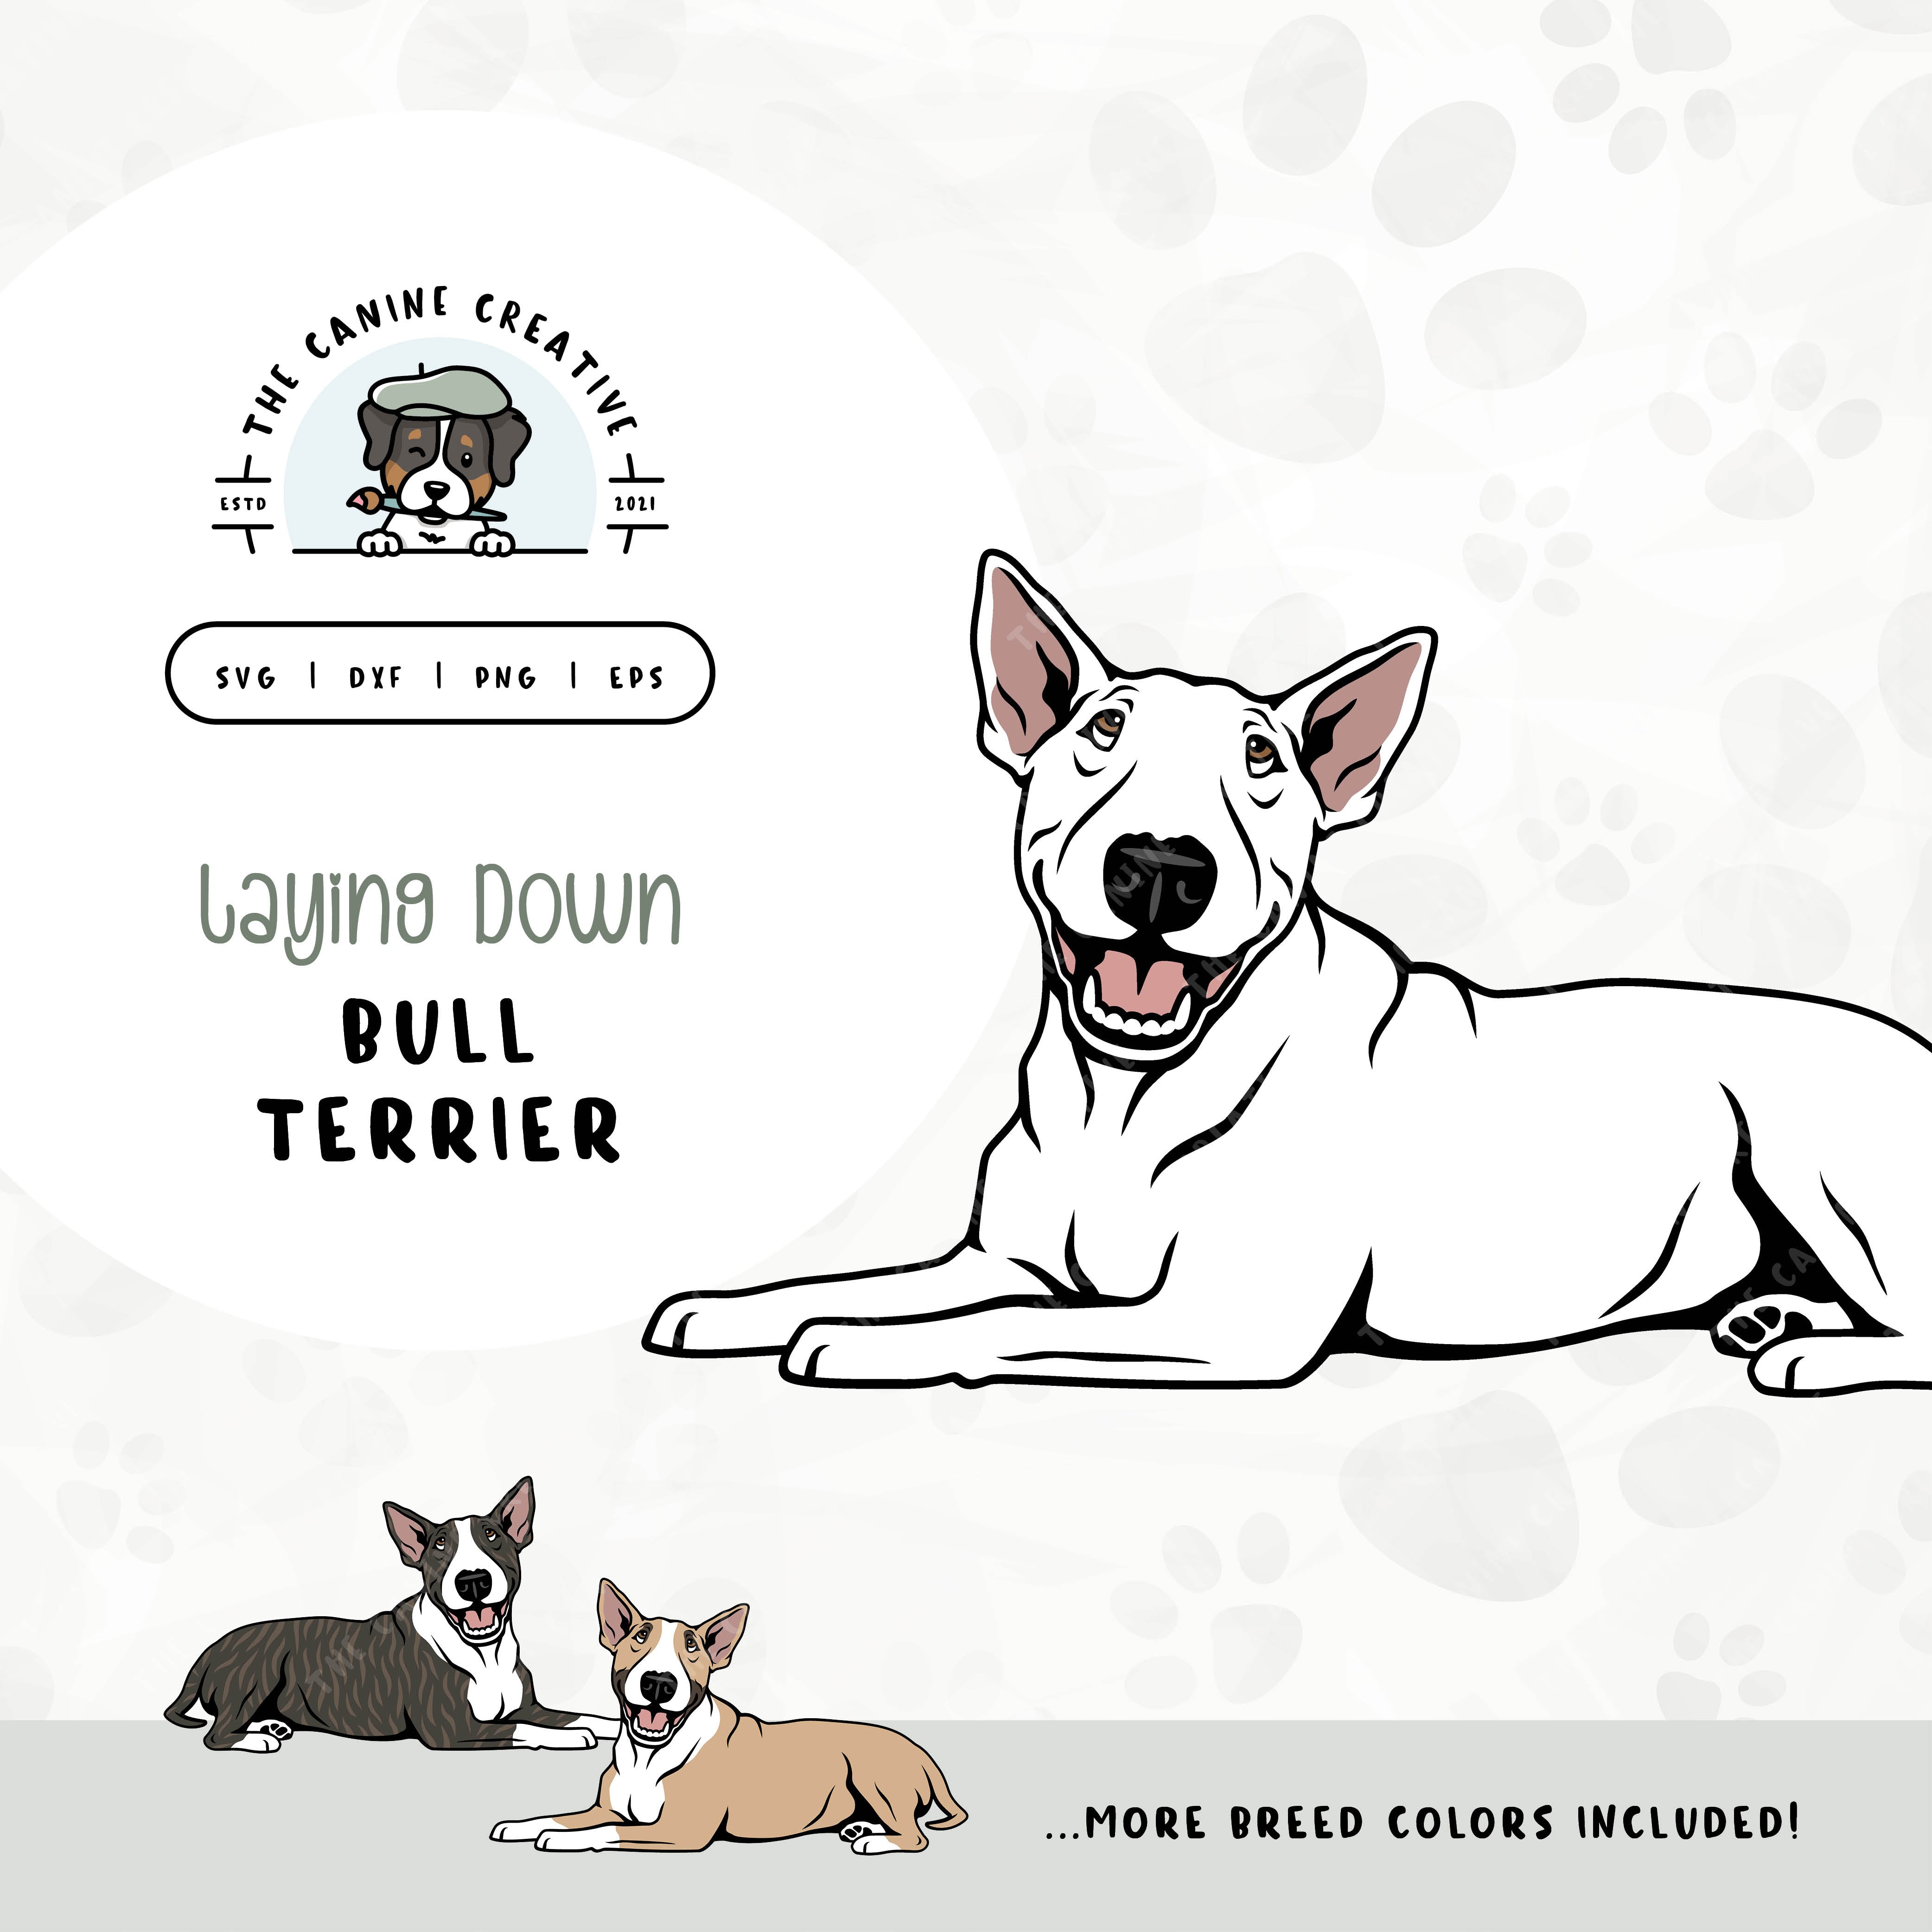 This laying down dog design features a Bull Terrier. File formats include: SVG, DXF, PNG, and EPS.